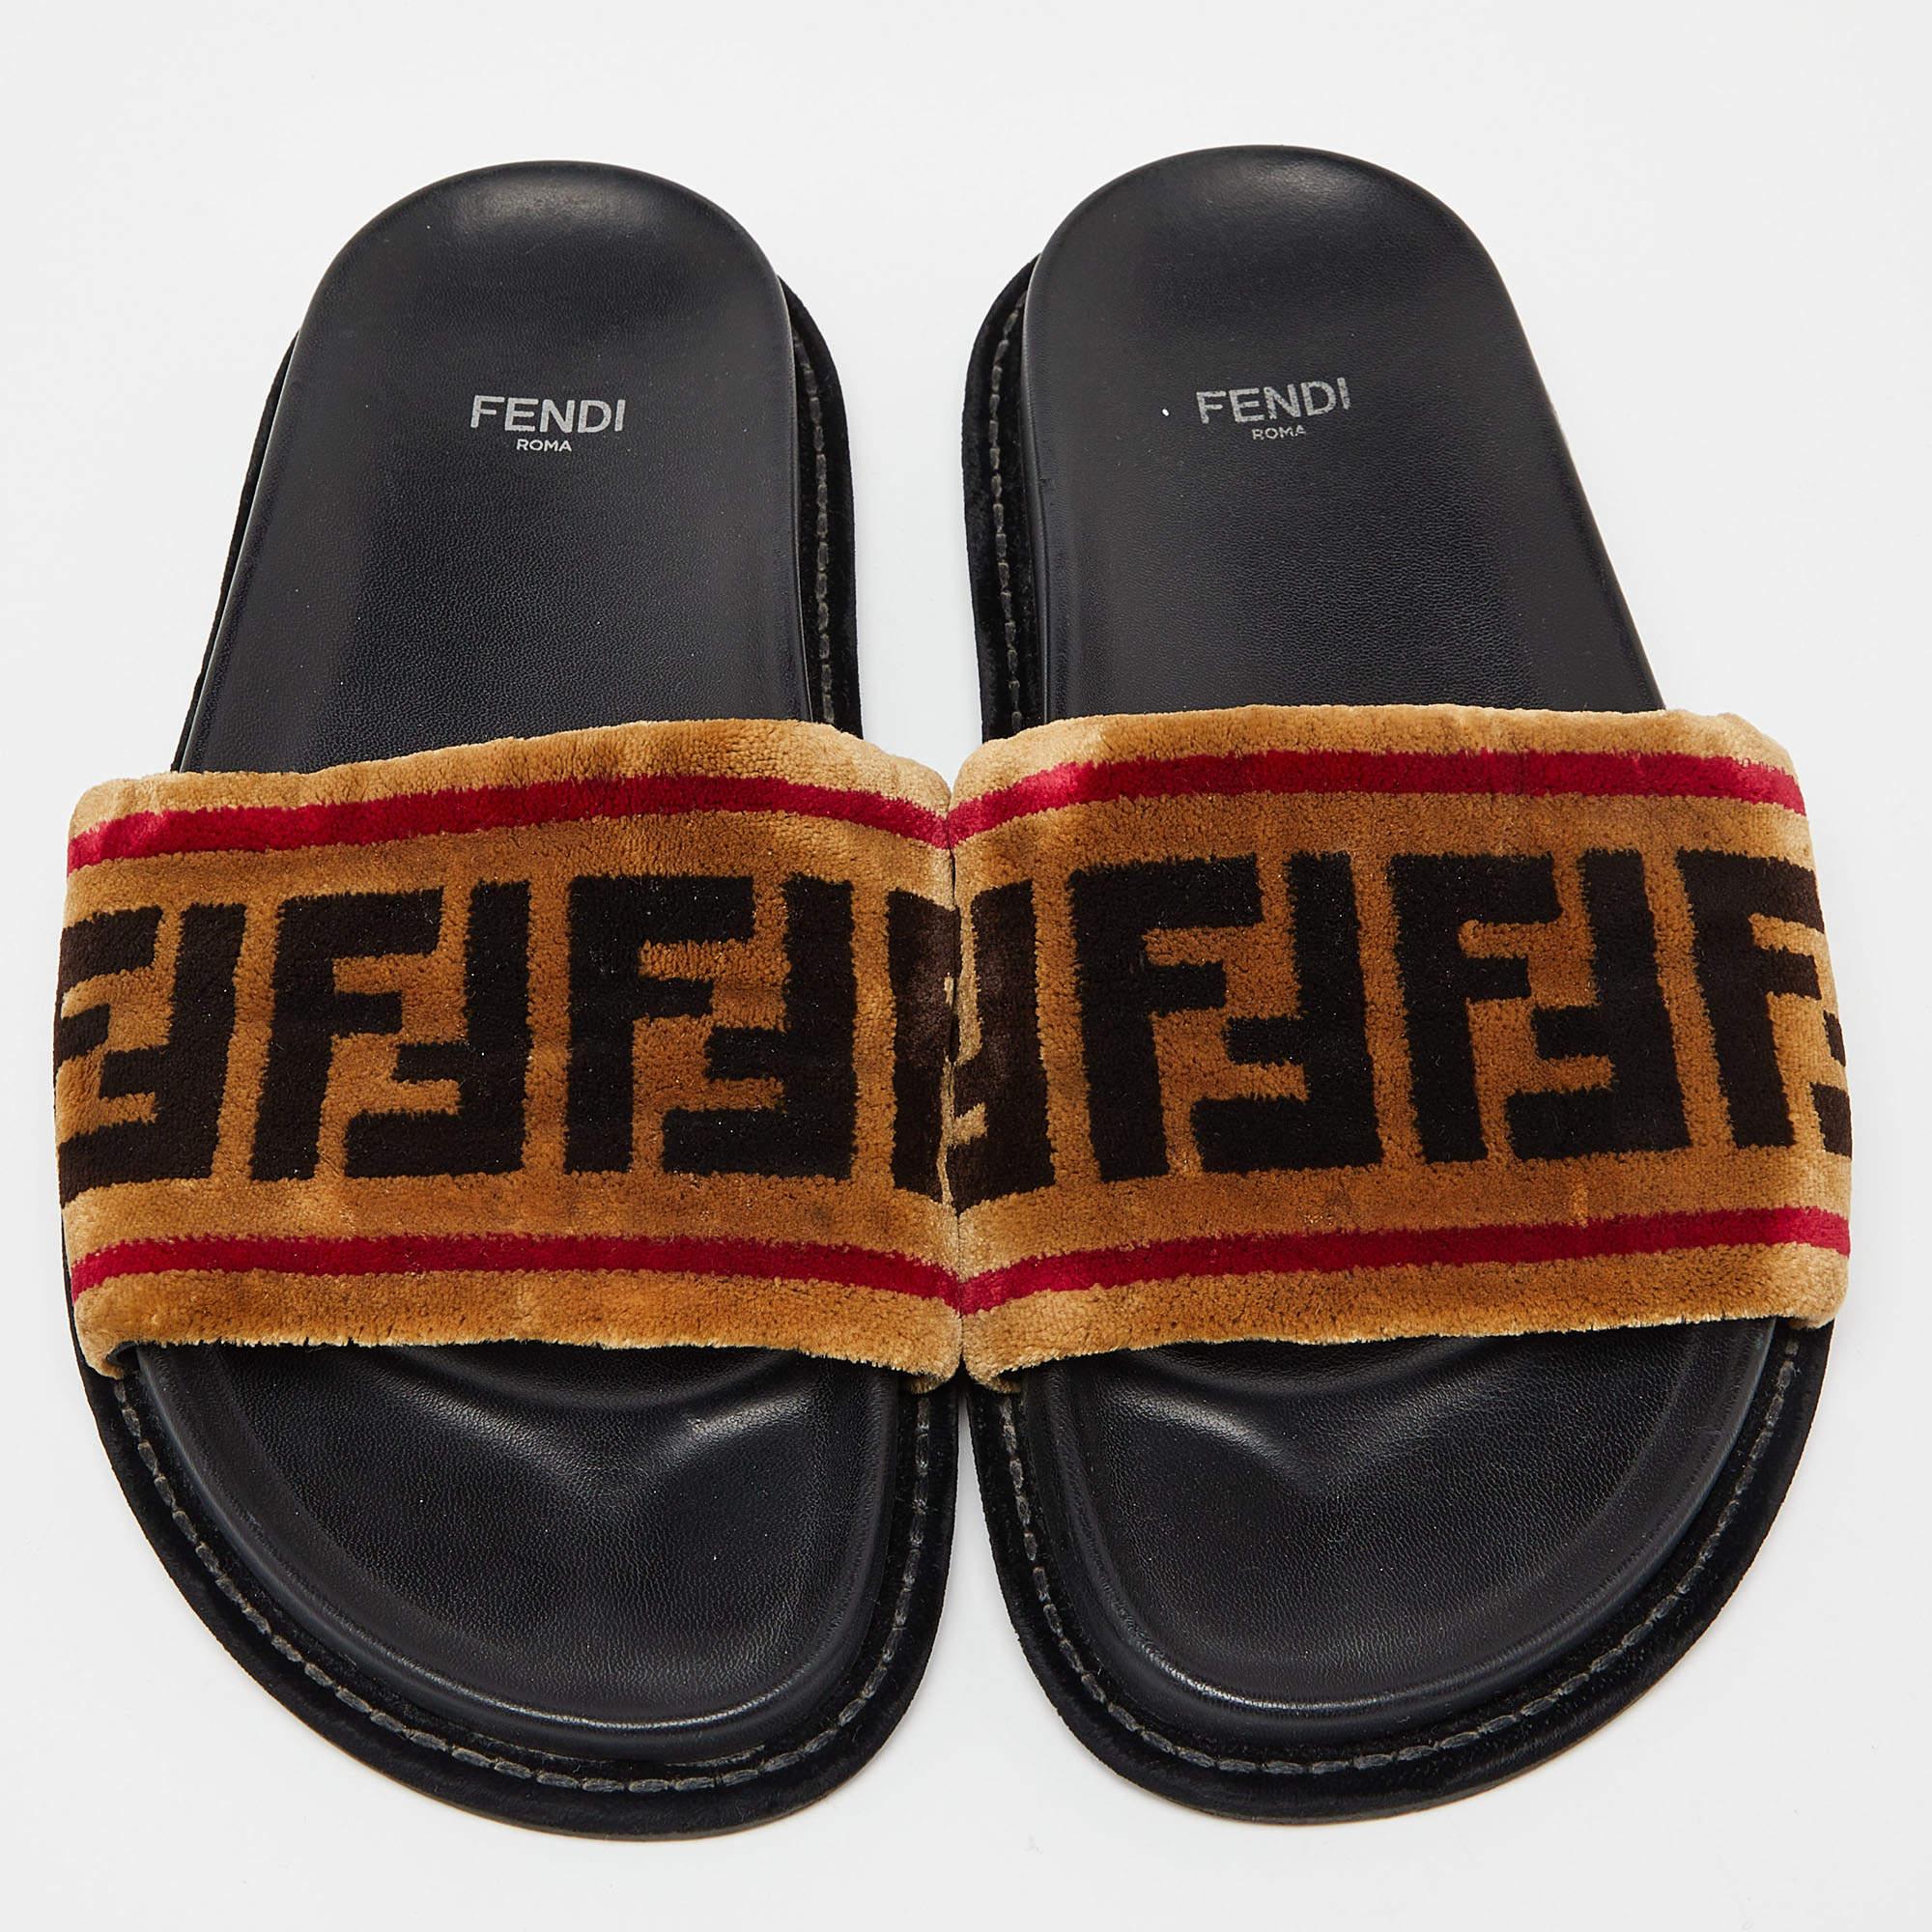 If you want to experience comfort without compromising on style, then look no further. These slide sandals from Fendi are all you need. They are made using brown Zucca velvet on the upper and flaunt neat rubber insoles and a slip-on style. They are